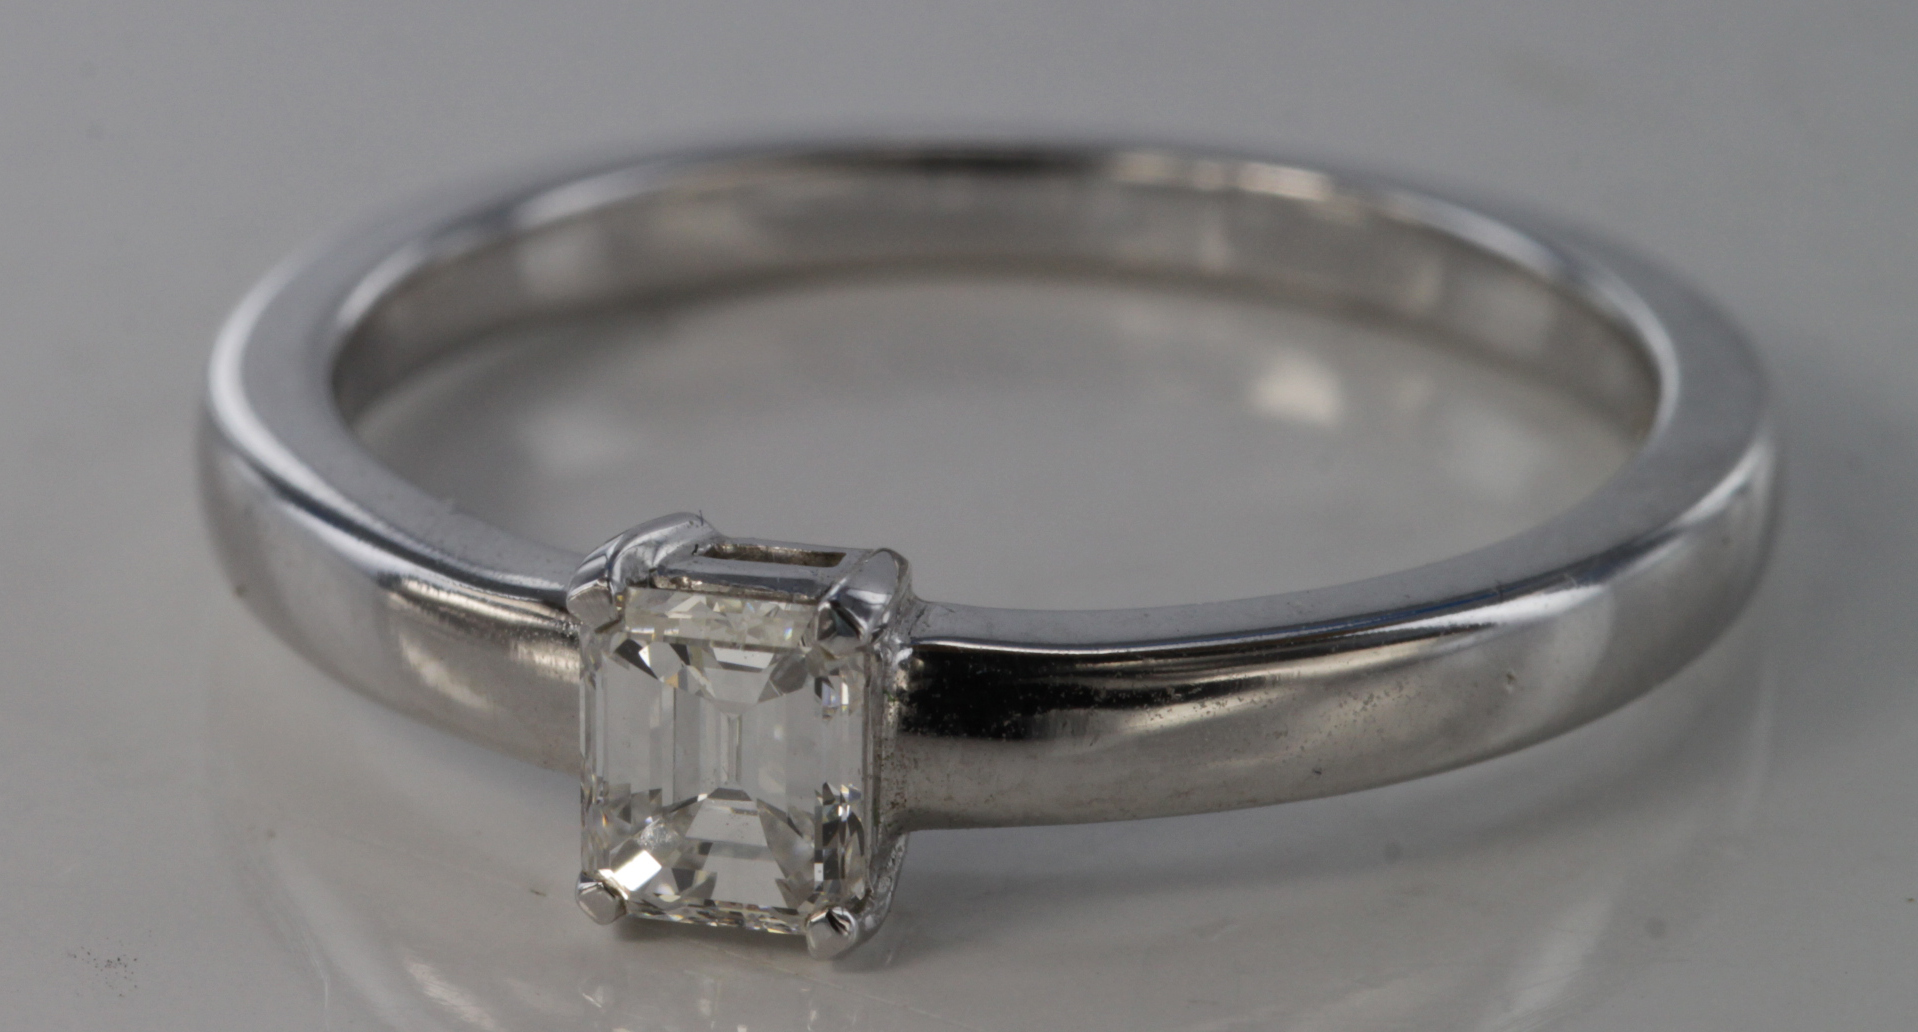 18ct White Gold Solitaire emerald cut Diamond Ring approx 0.25ct weight size N weight 3.3g